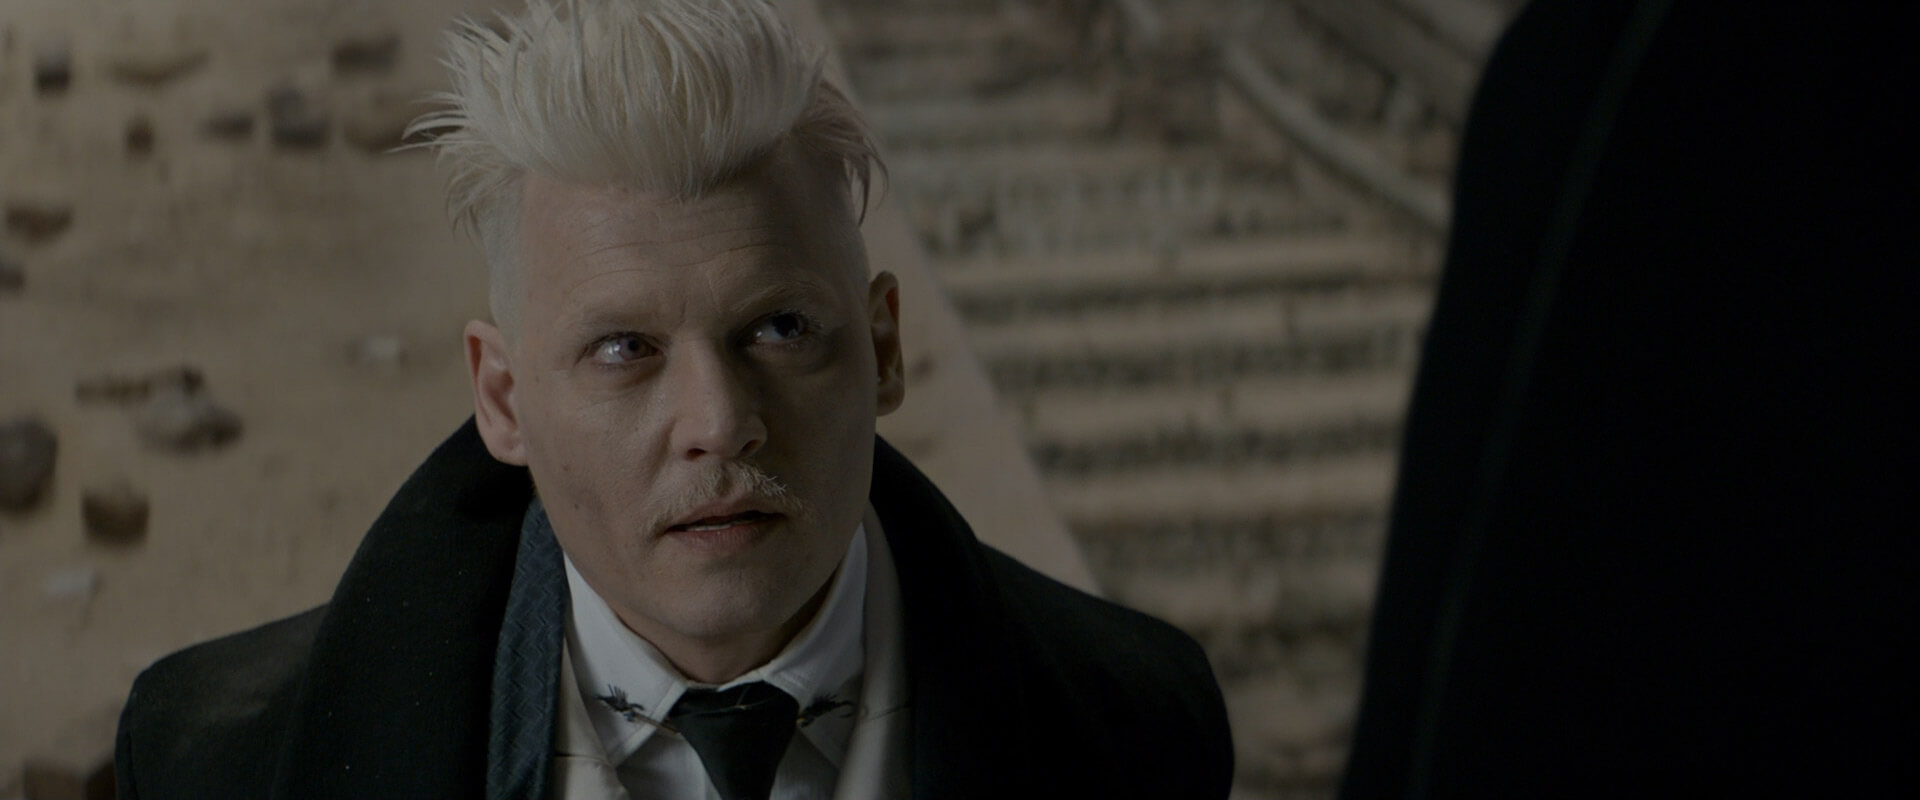 Johnny Depp as Grindelwald Fantastic Beasts and Where to Find Them